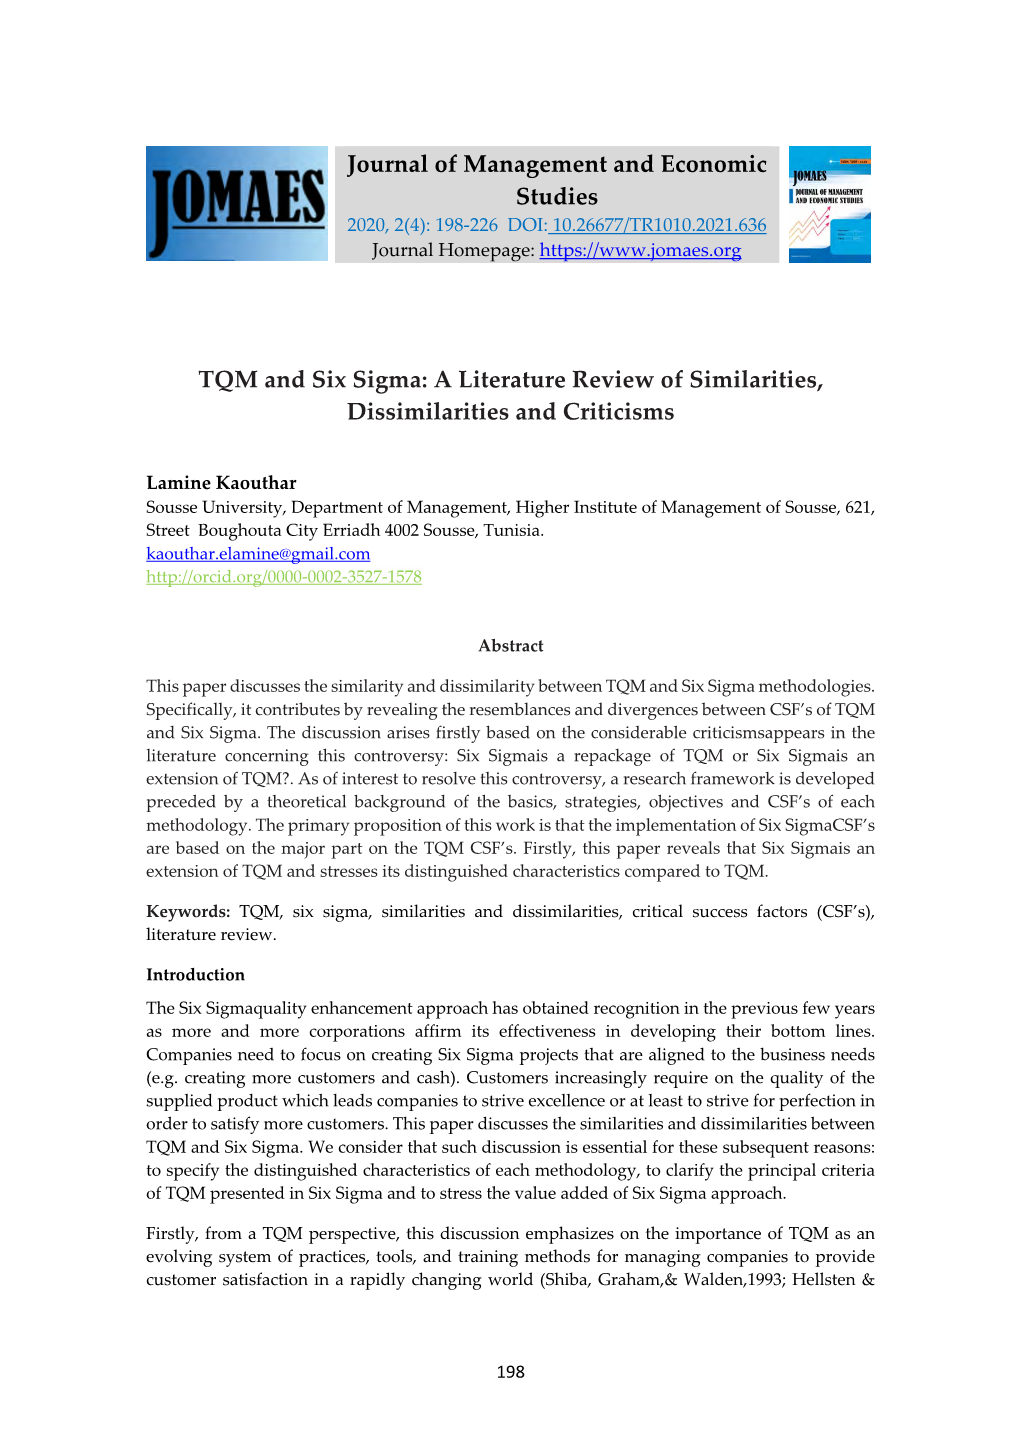 TQM and Six Sigma: a Literature Review of Similarities, Dissimilarities and Criticisms